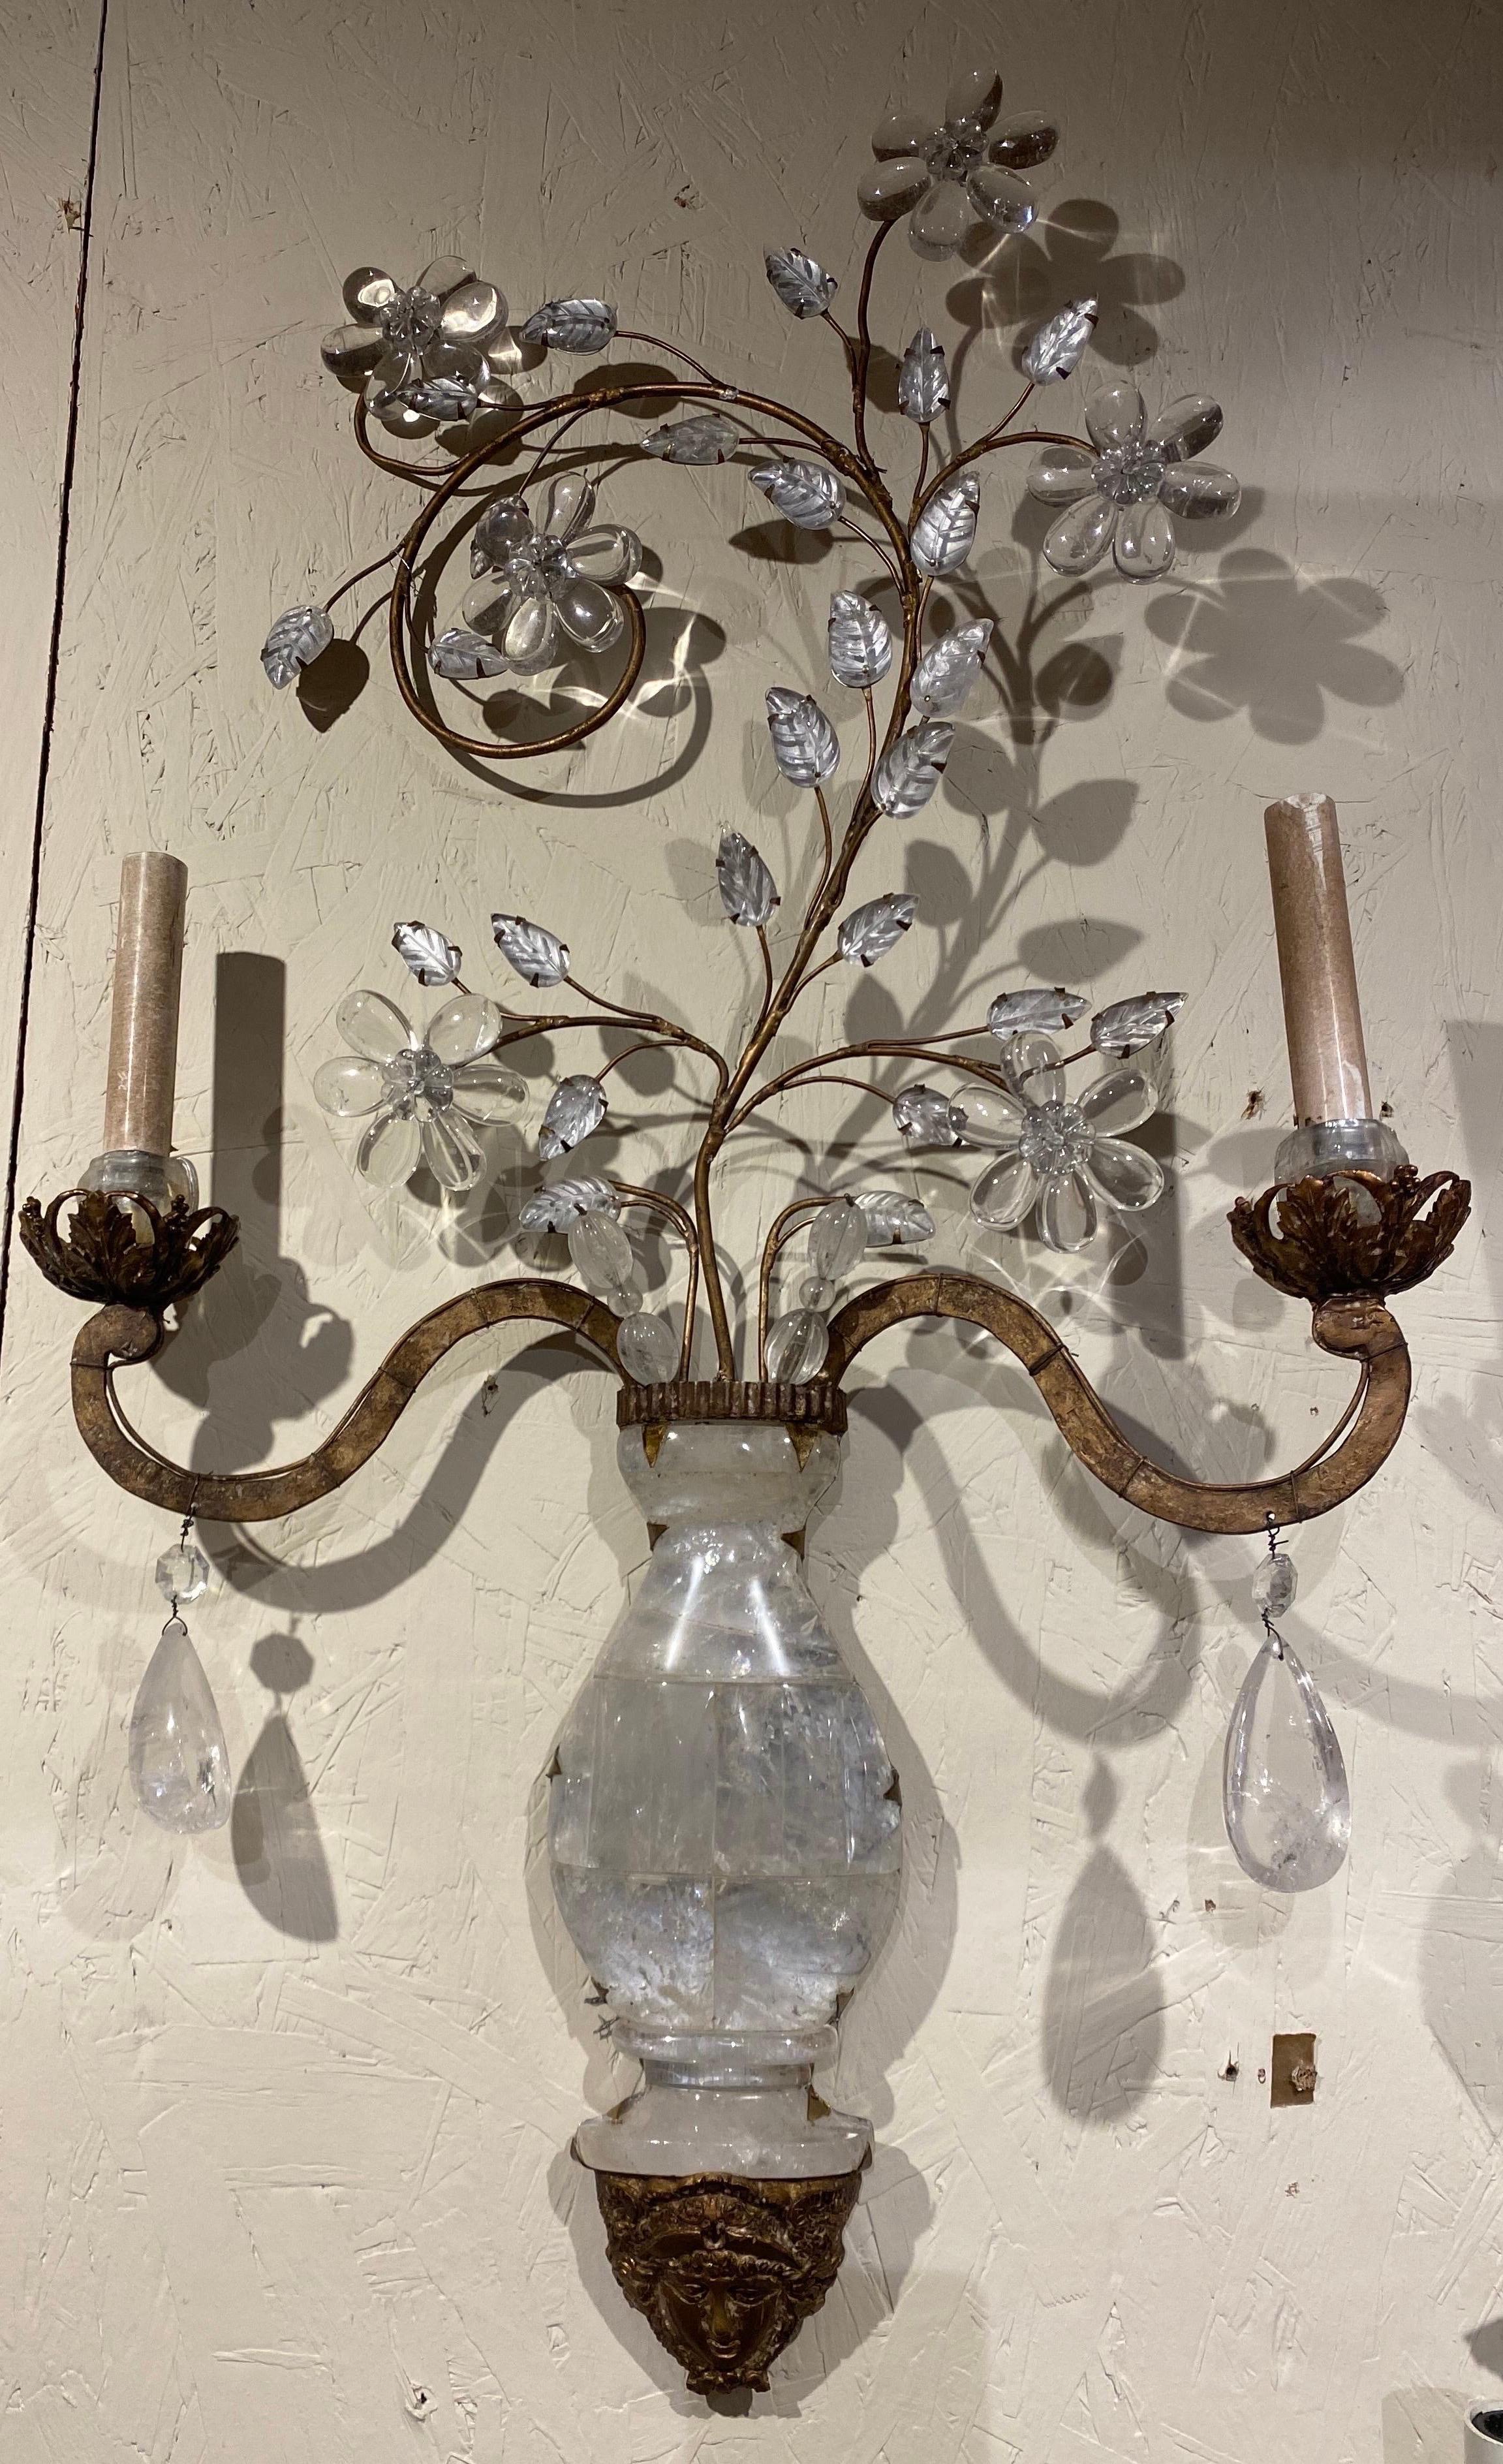 Great pair of opposing rock crystal sconces with figures faces. The pair have floral scrolls that mirror each other for a proper left and right sconce. Made of all tock crystal- including the bobeches.

Wired and ready to go.